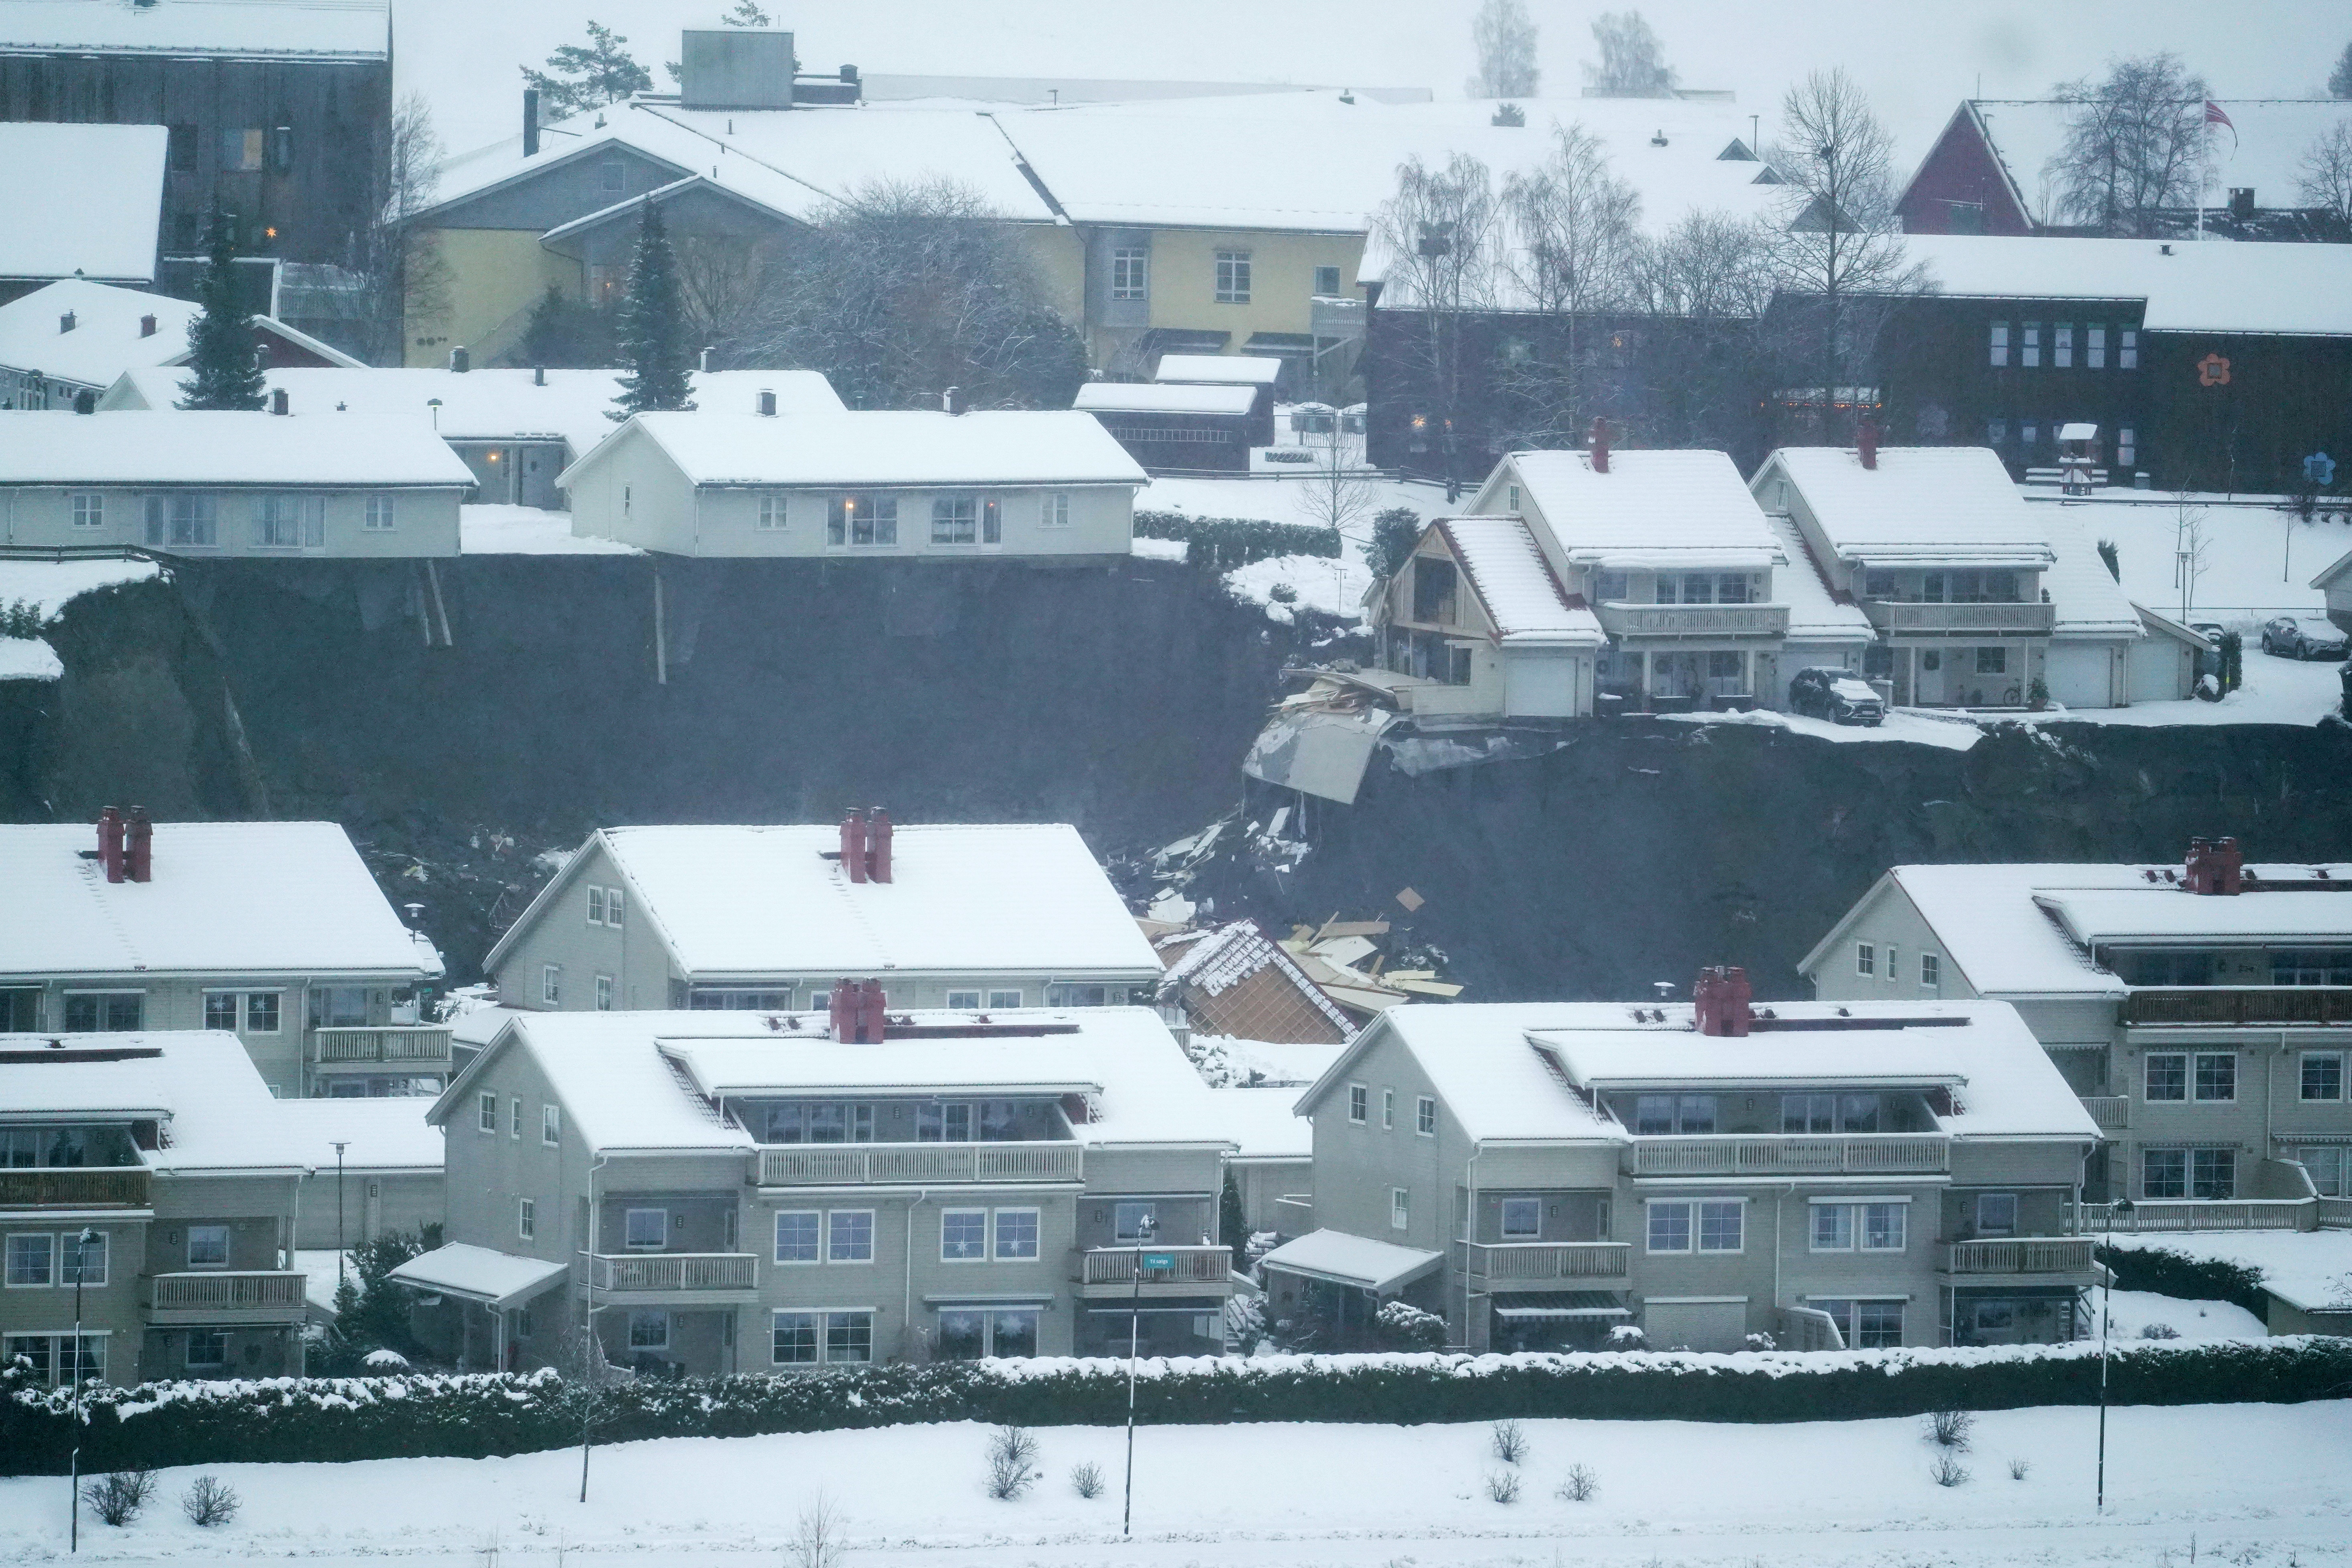 Some houses remain standing while others are seen damaged after a landslide occurred in a residential area in Ask, near Oslo